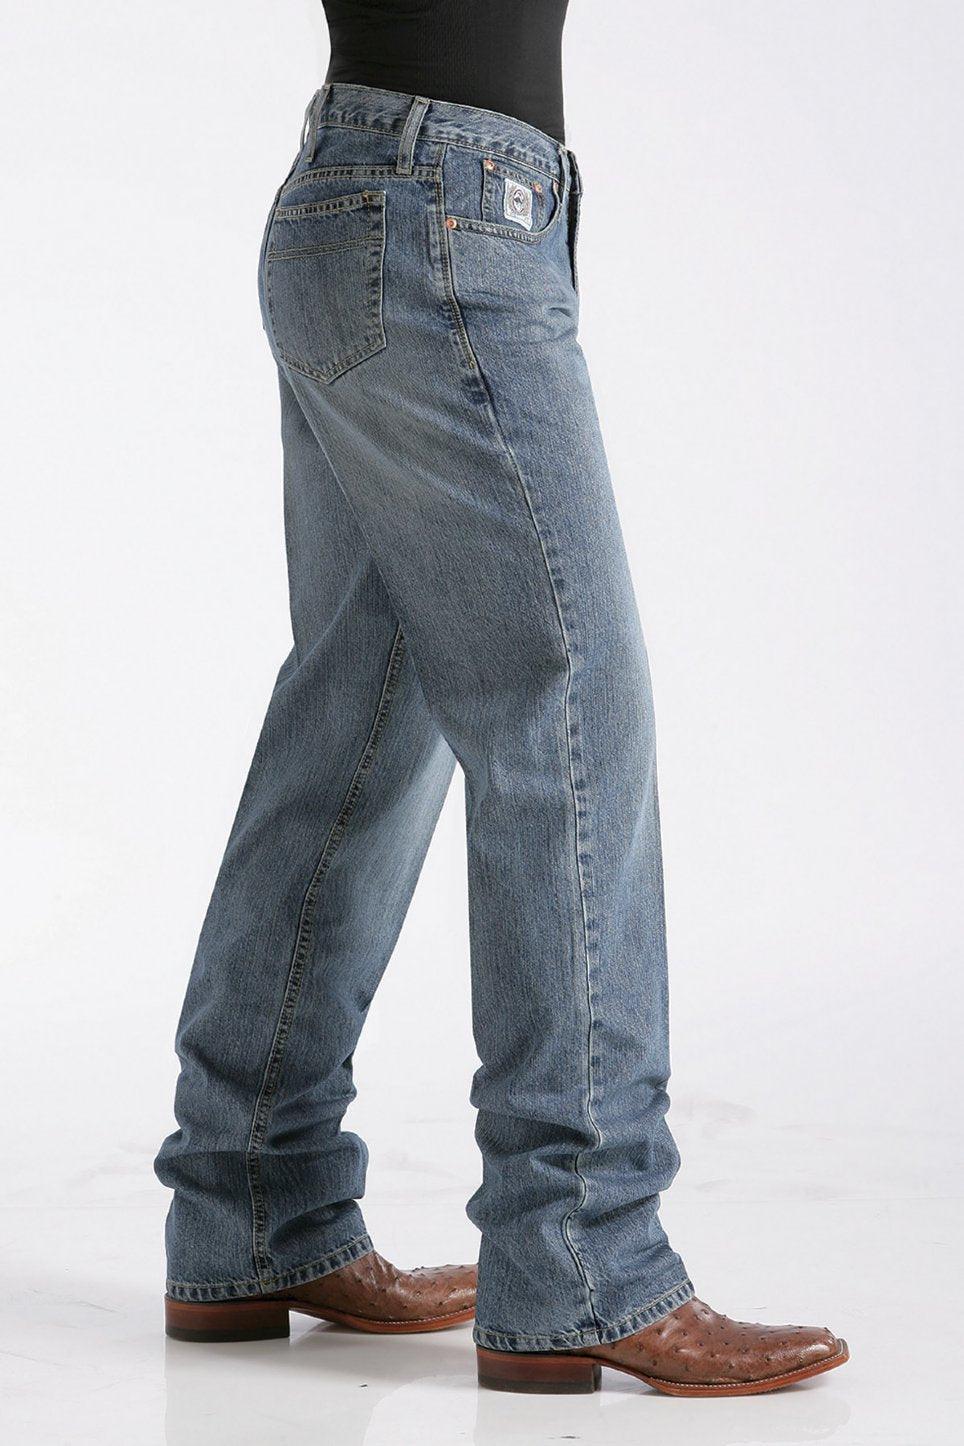 Side view Cinch | White Label Relaxed Fit Medium Stonewash Jean